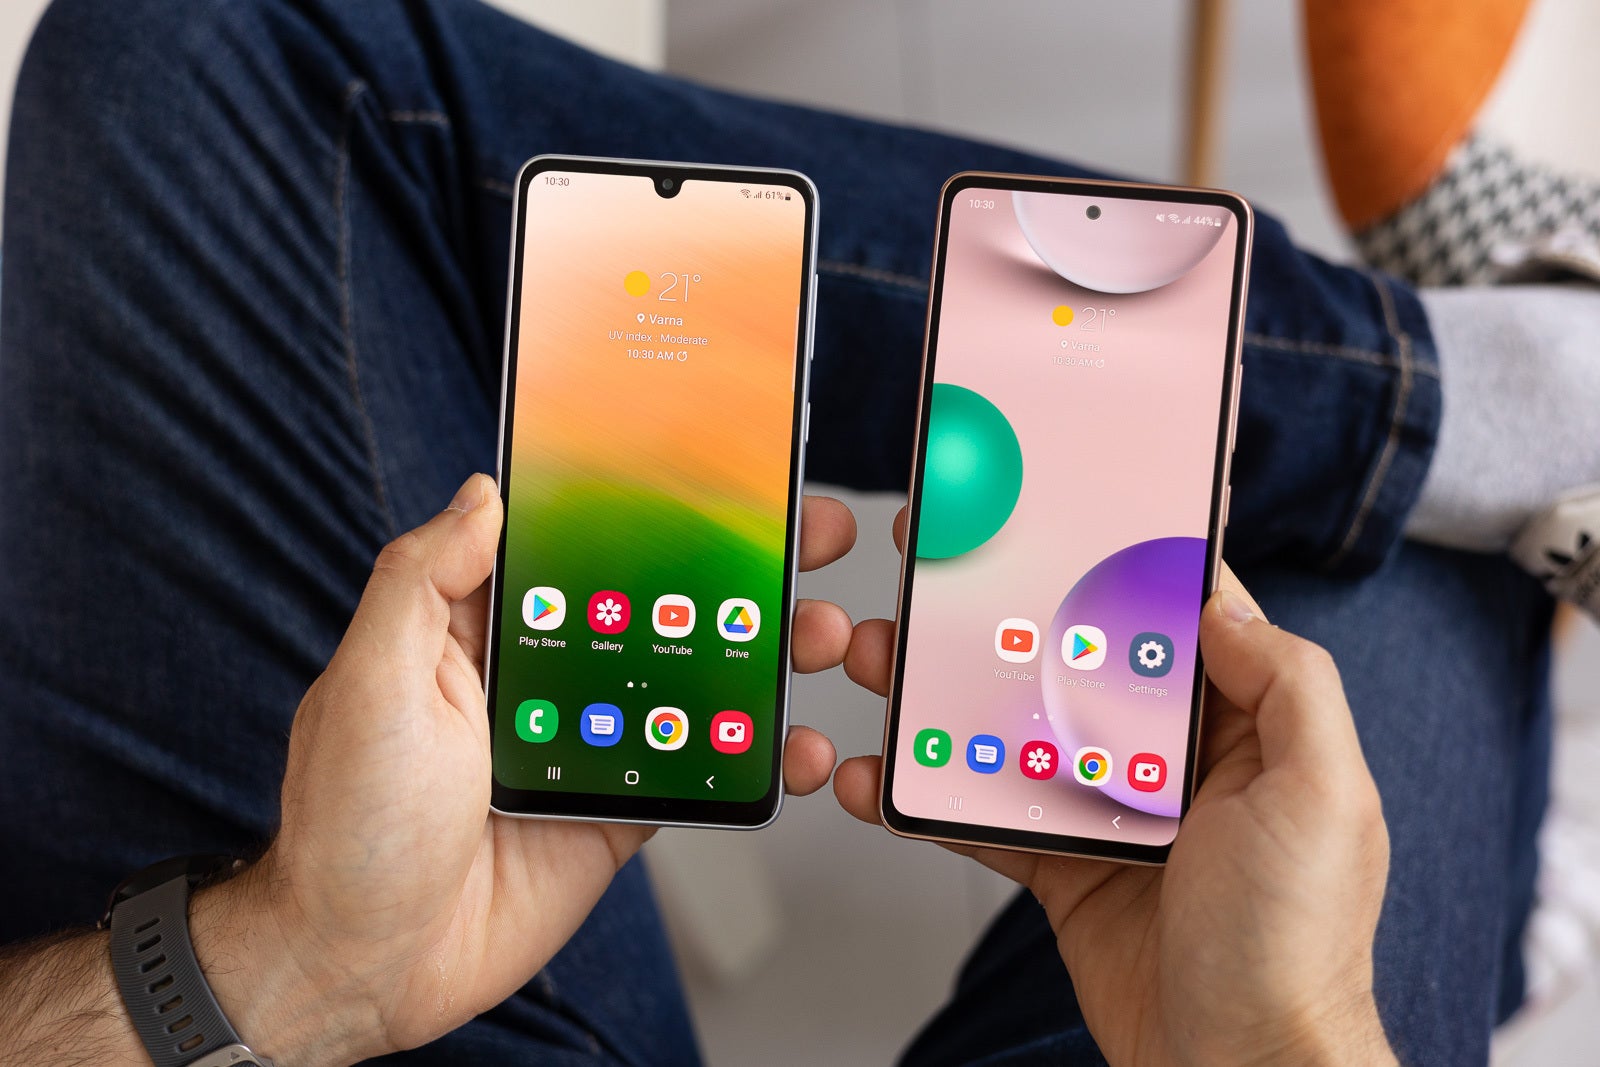 The A33 has bigger bezels and a chin, while the A53 looks more elegant, but the screen quality is nearly identical - Samsung Galaxy A53 5G vs Galaxy A33 5G: all the differences